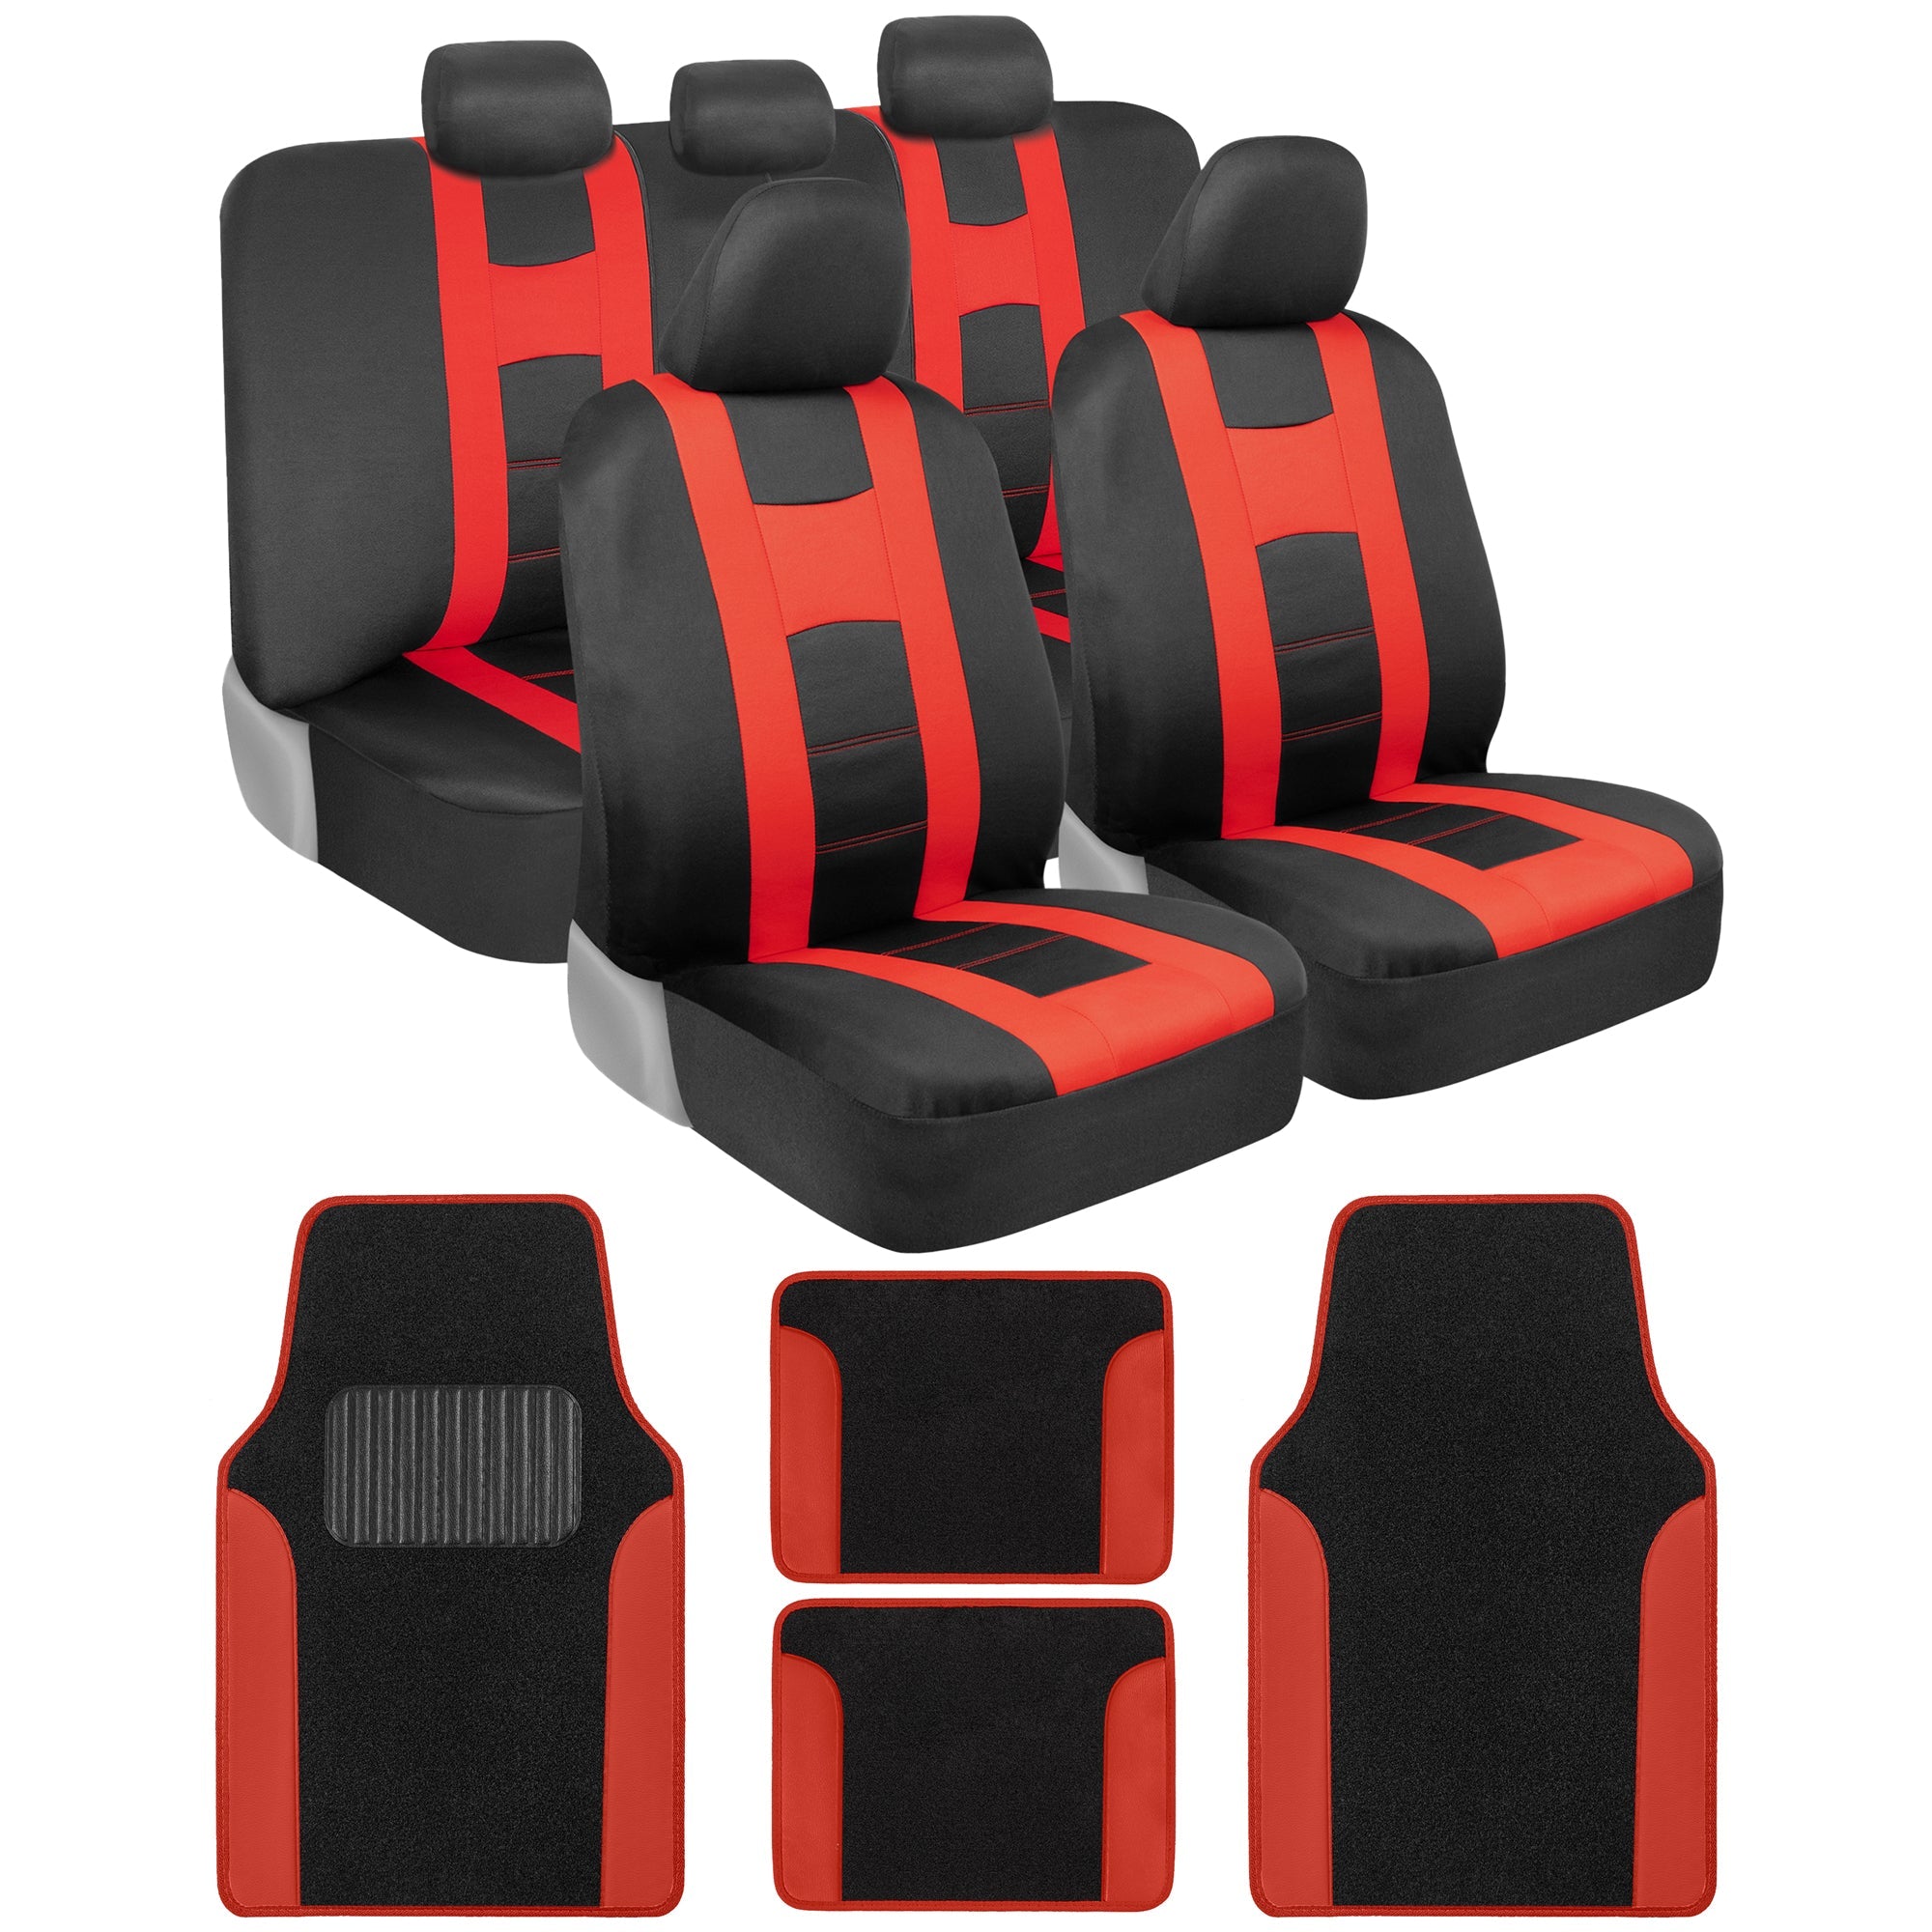 carXS Forza Series Red Seat Covers Full Set Combo with Car Floor Mats – Front and Rear Bench Seat Cover & Floor Mat Protector Set, Interior Covers for Auto Truck Van SUV - Red